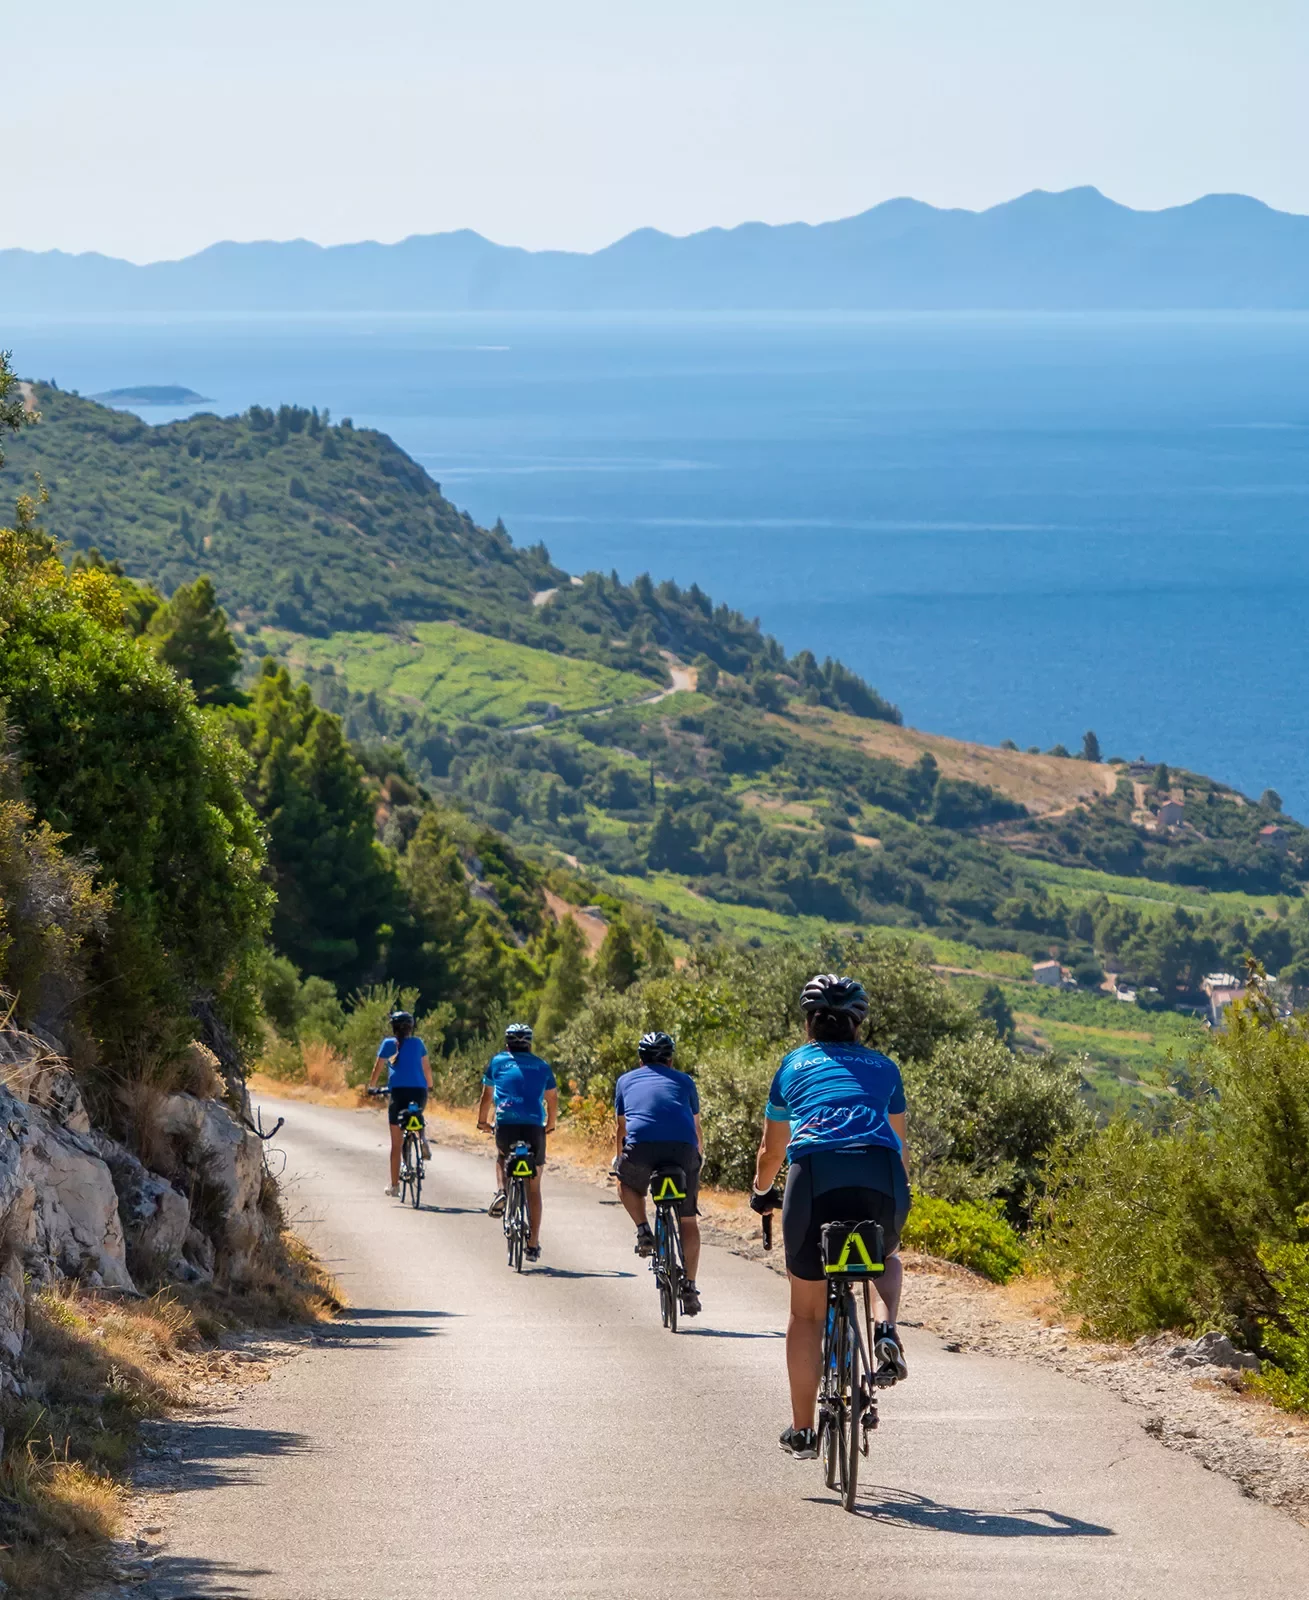 Four guests cycling down coastal road, hillside, ocean in distance.